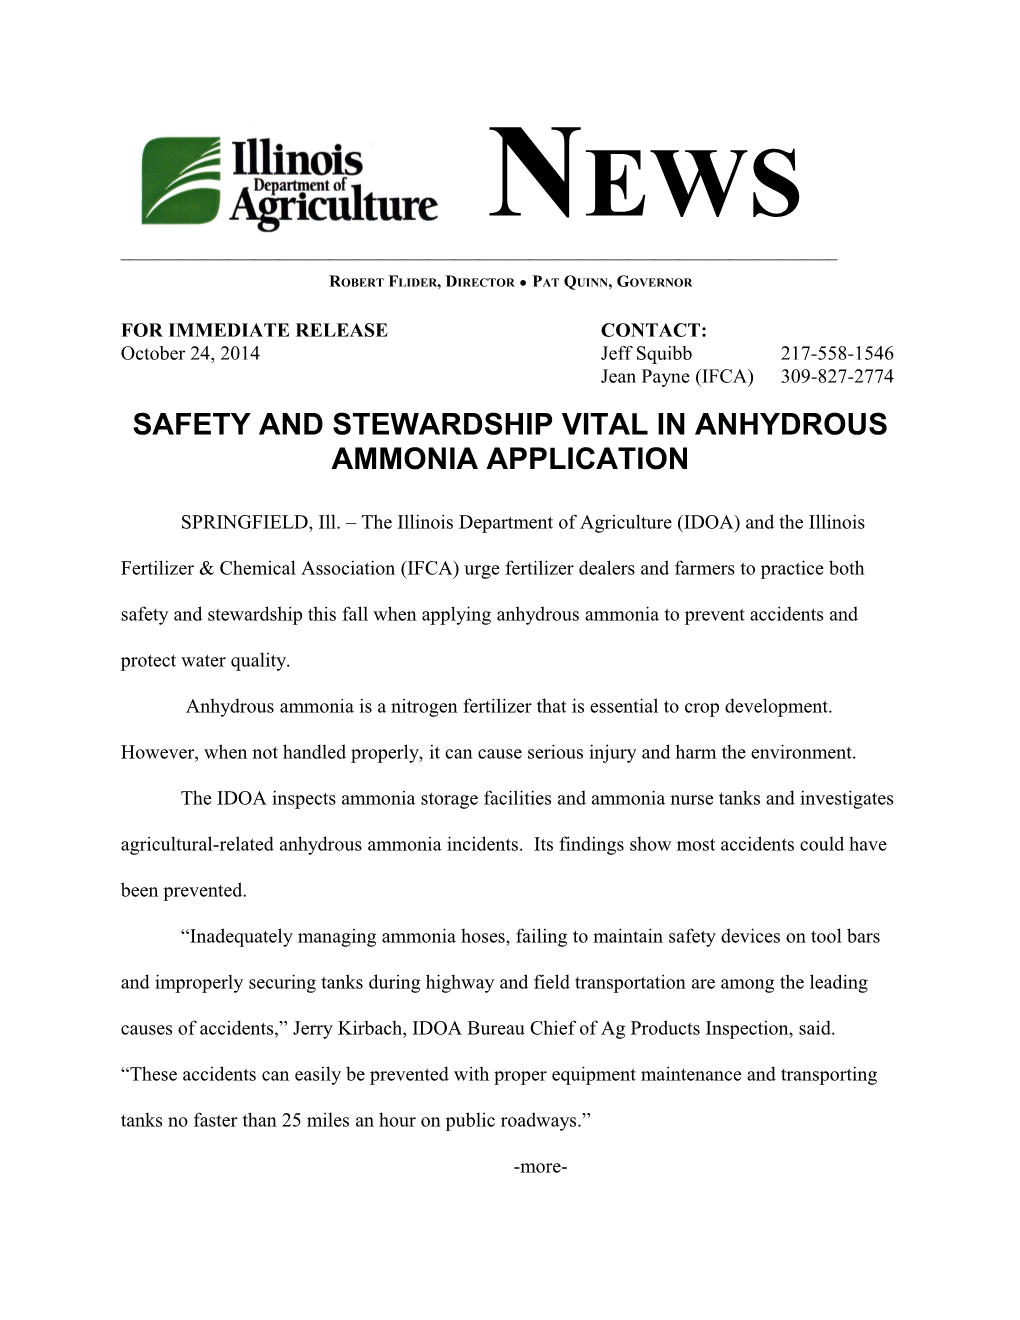 Safety and Stewardship Vital in Anhydrous Ammonia Application